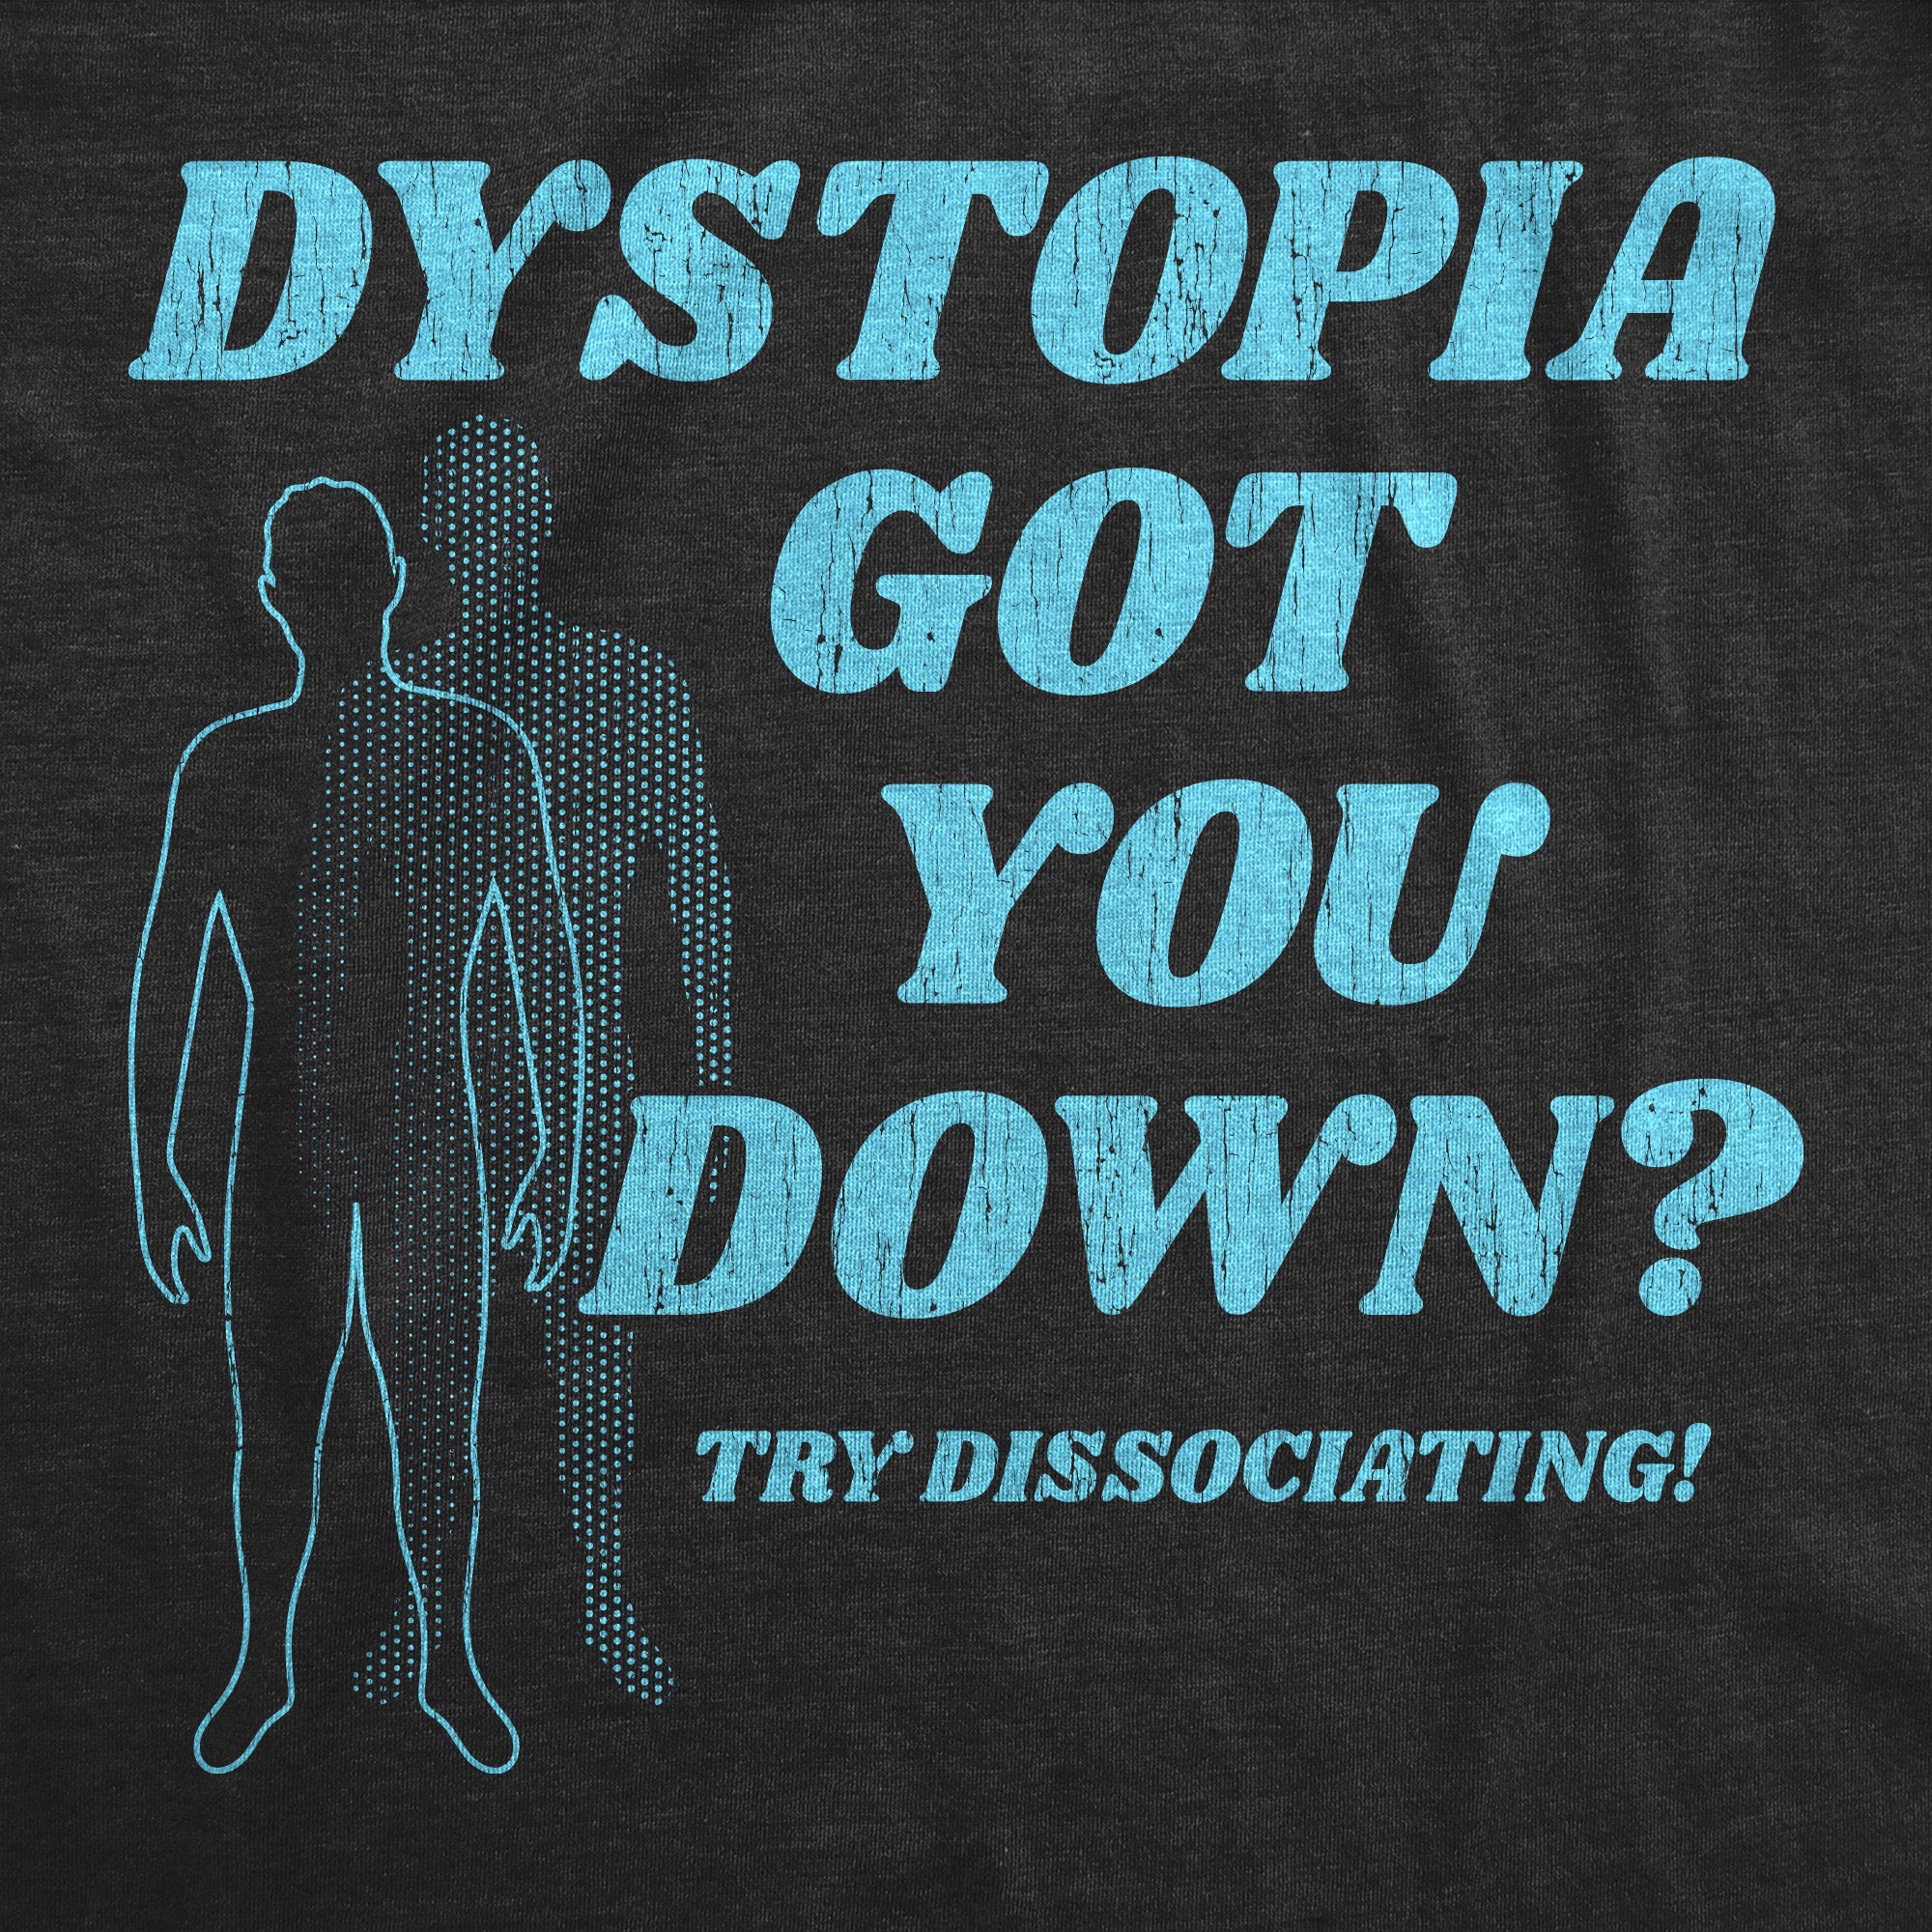 Funny Heather Black - DYSTOPIA Dystopia Got You Down Try Dissociating Mens T Shirt Nerdy Sarcastic Tee